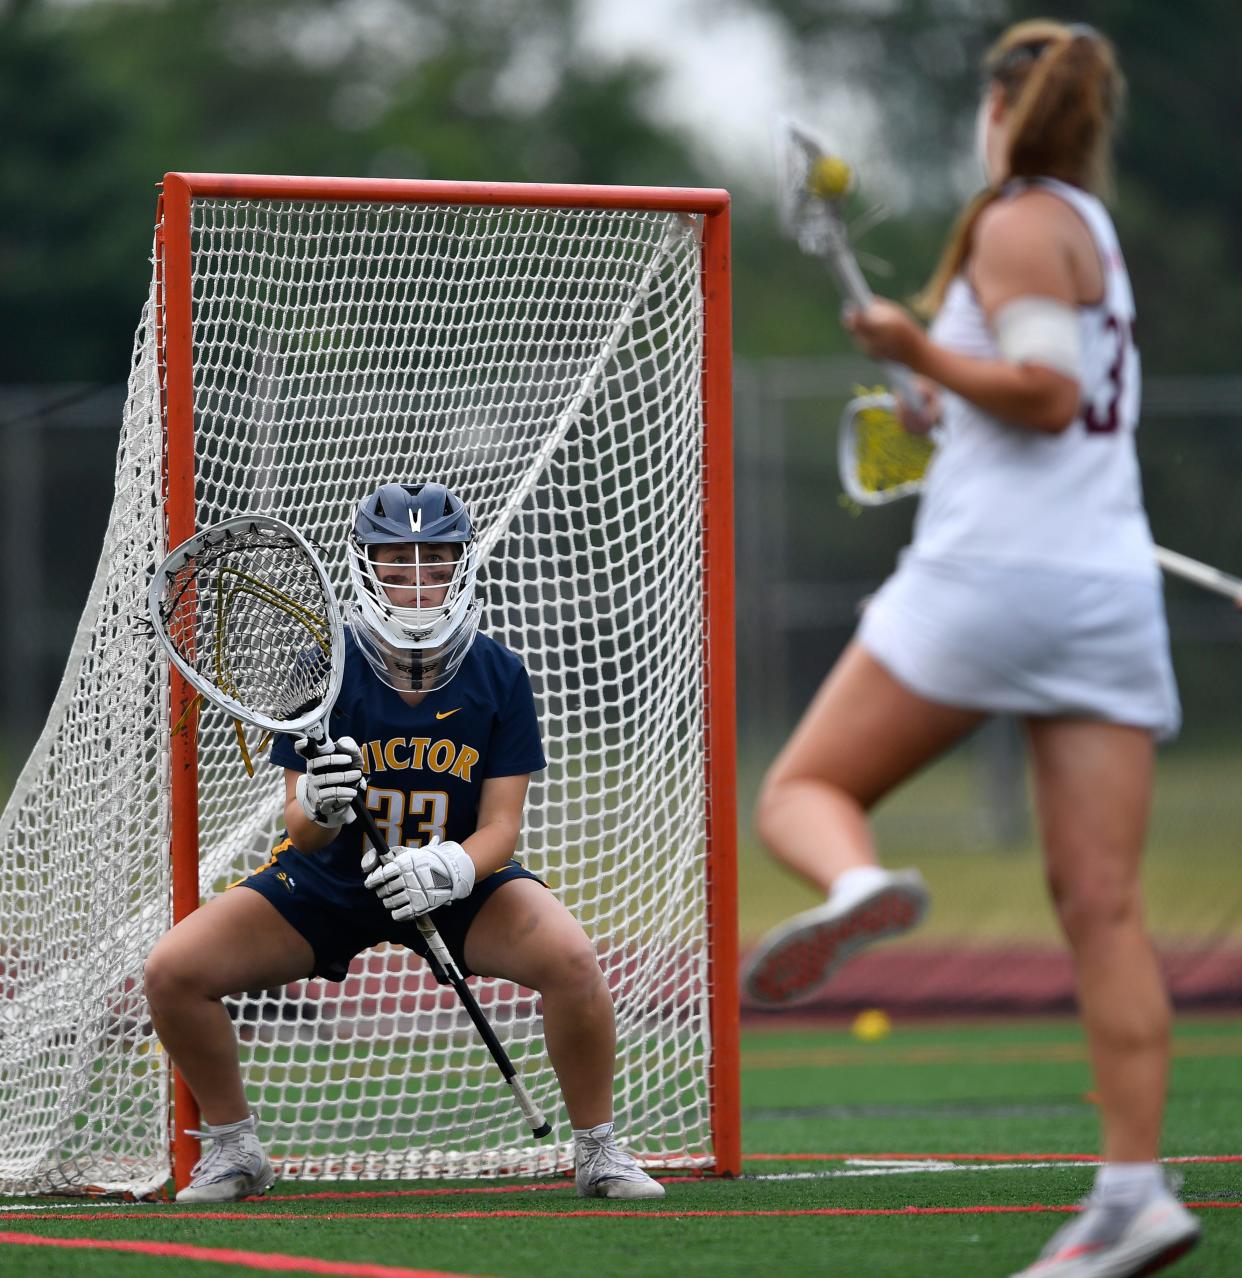 Victor goalie Maggie Allen gets in position before making a save during the NYSPHSAA Girls Lacrosse Championships Class B final in Cortland, N.Y., Saturday, June 10, 2023. Victor won the Class B title with an 8-6 win over Garden City.